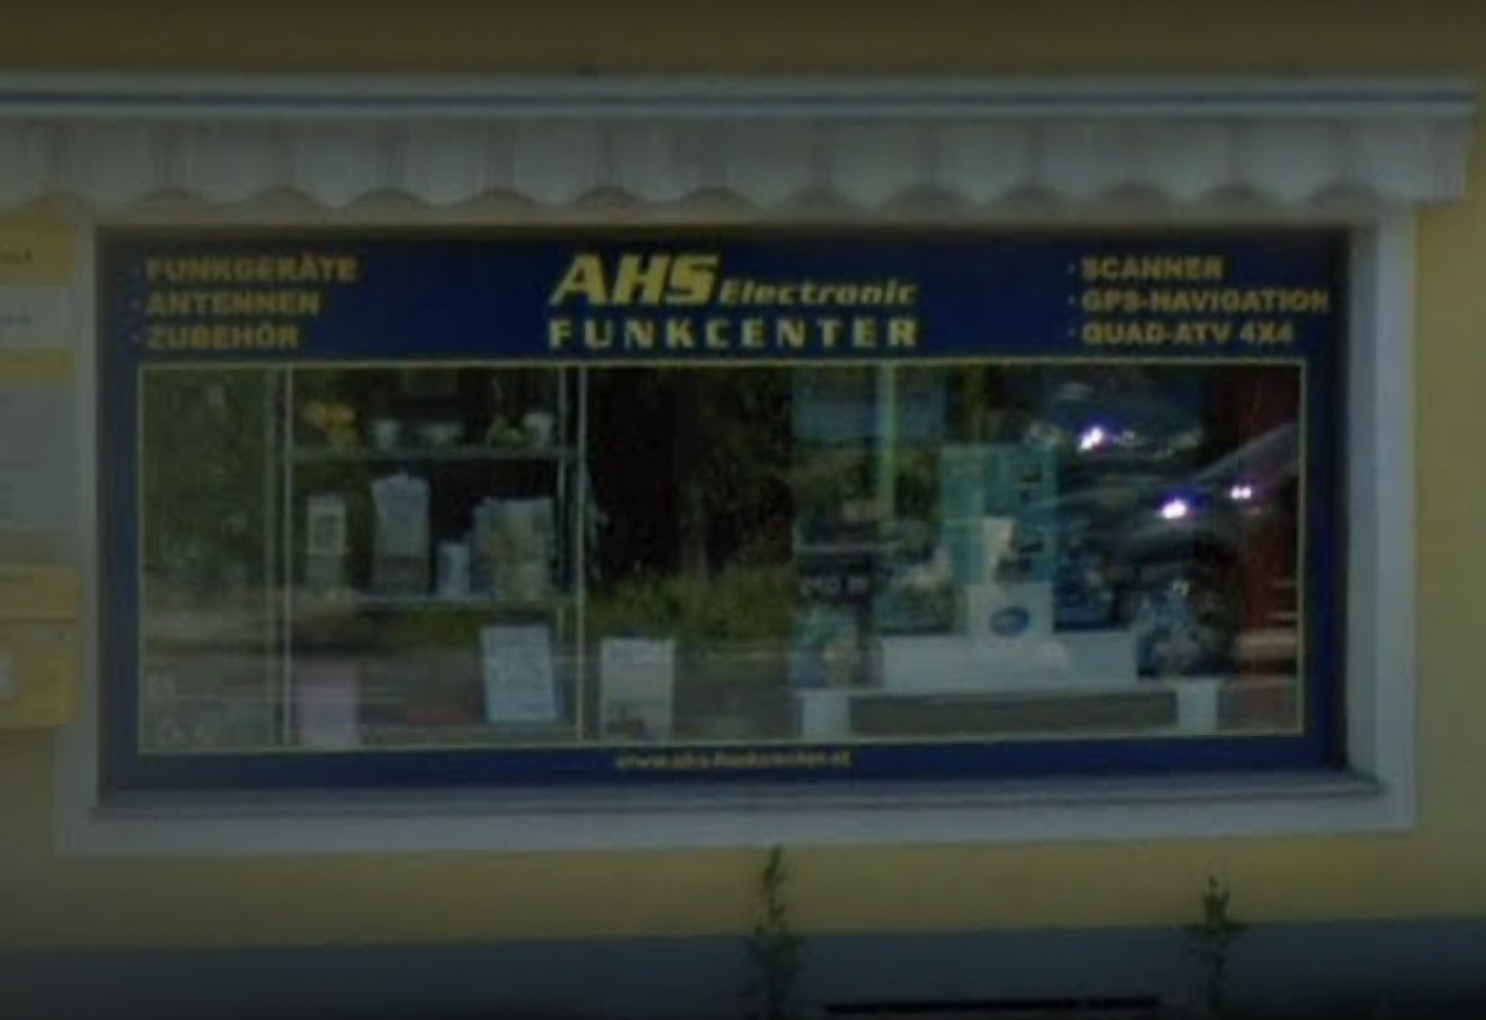 AHS Electronic Funkcenter